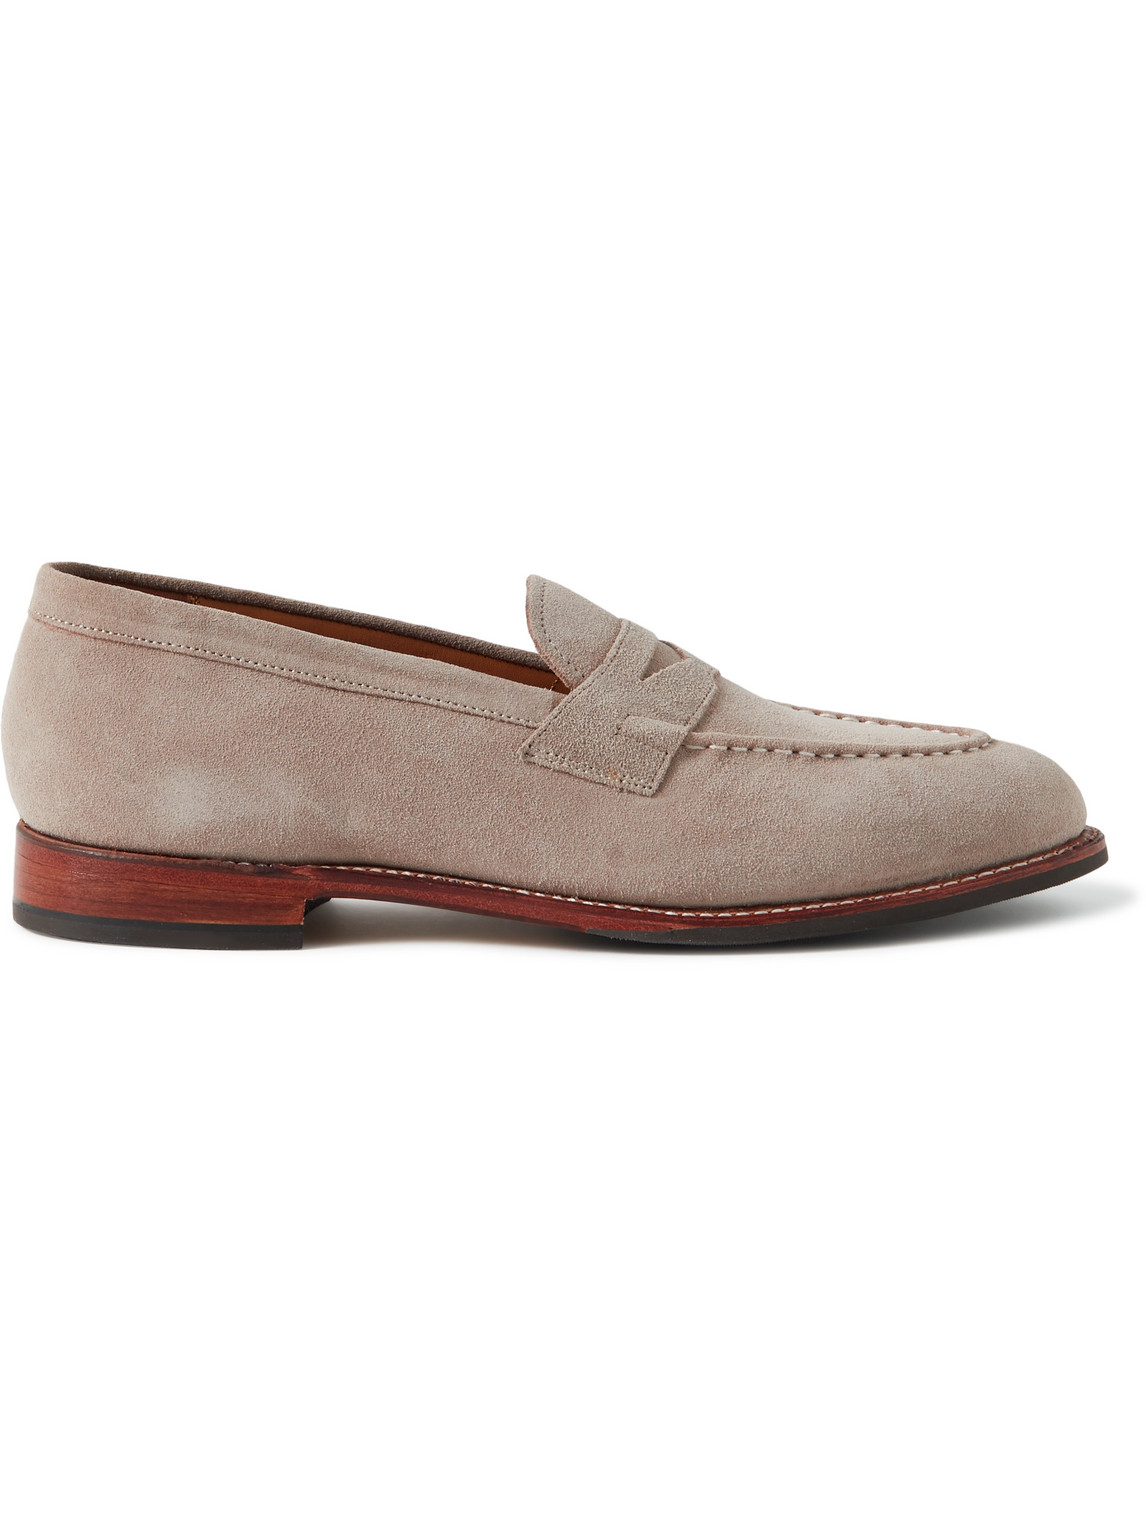 Grenson Lloyd Suede Penny Loafers In Brown